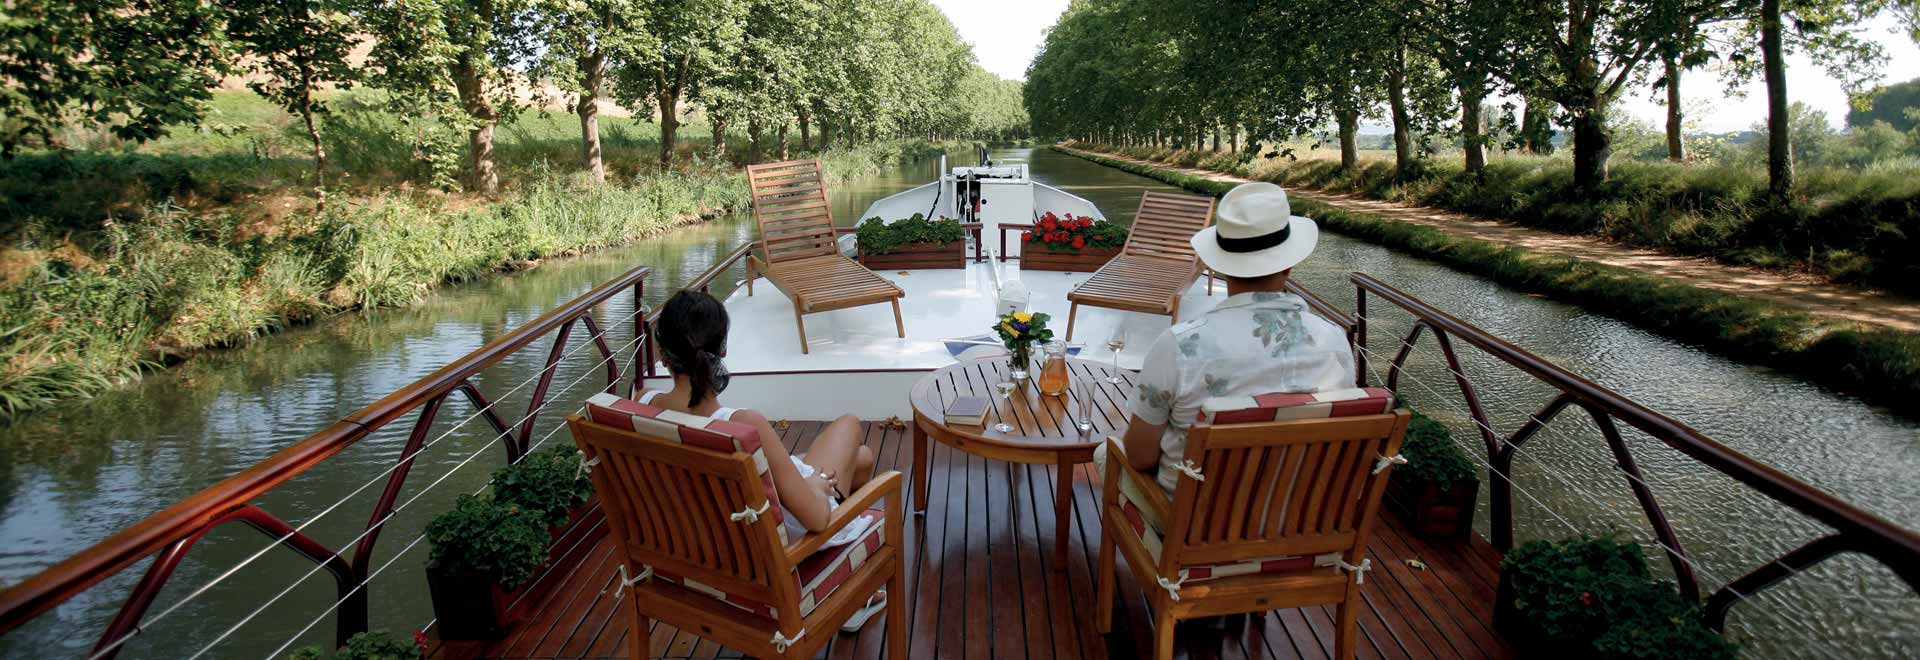 Explore Alsace by Canal aboard luxury barge, Panache – : European Waterways